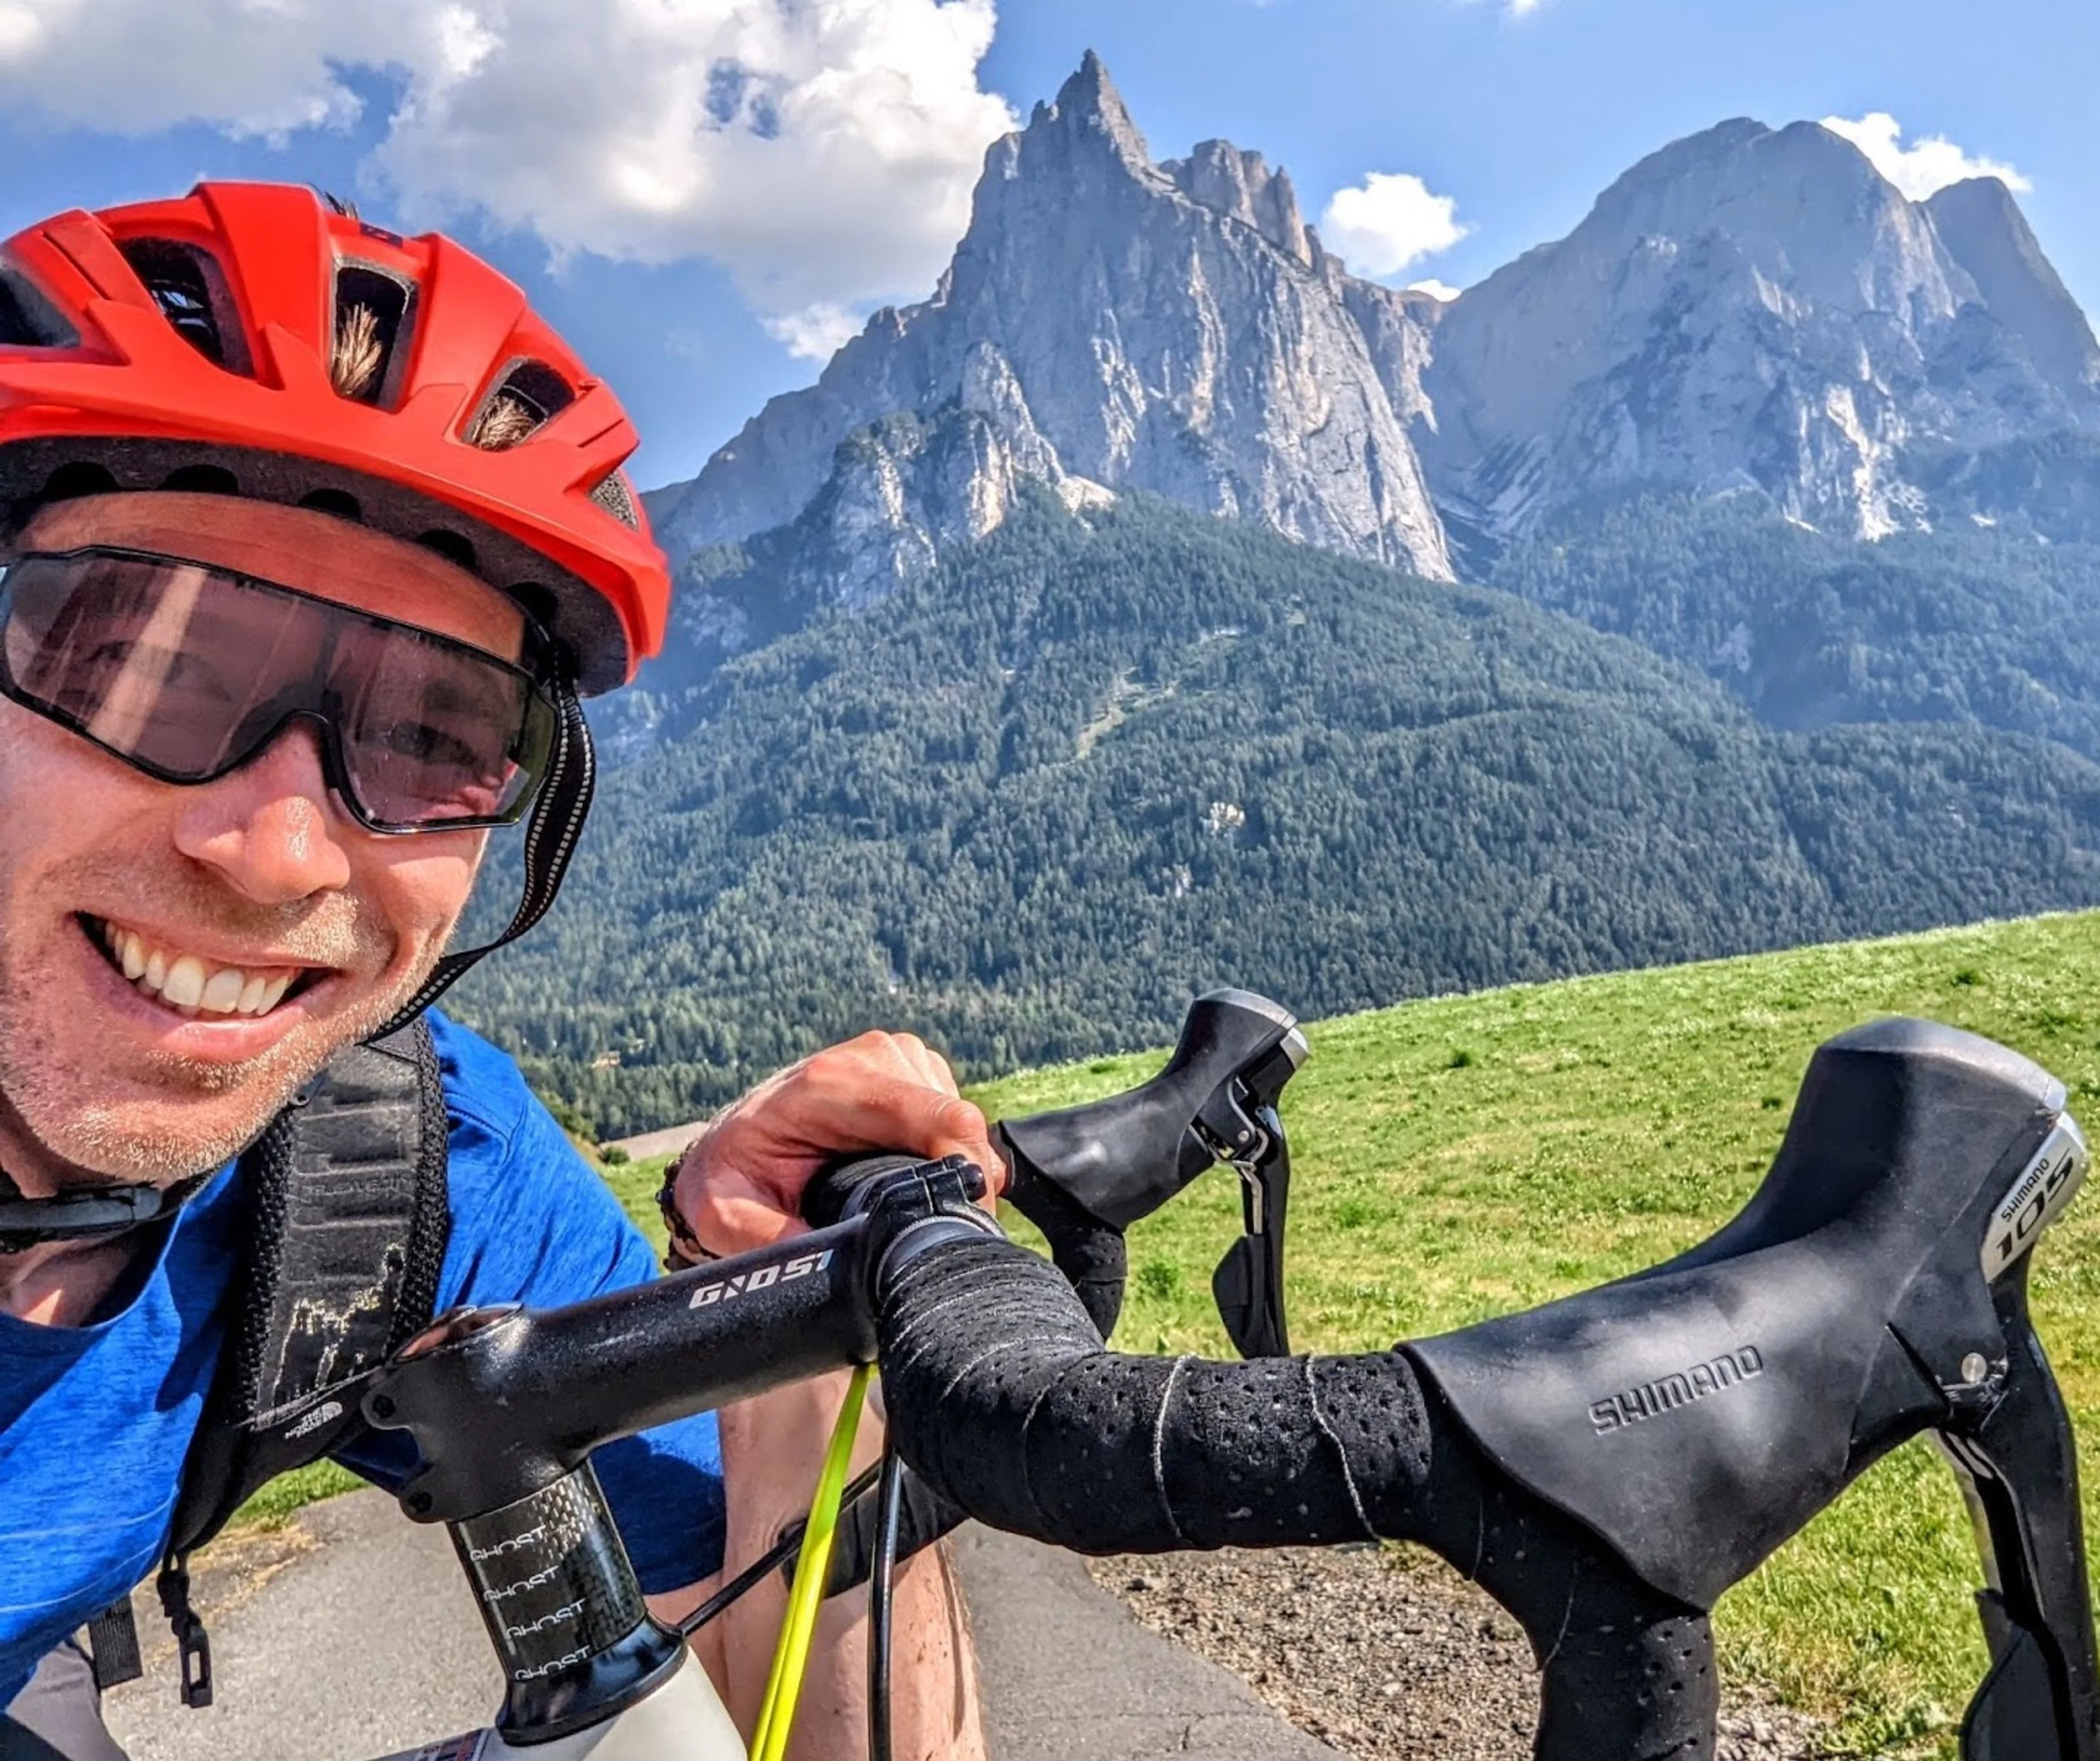 Cycling in the Dolomites